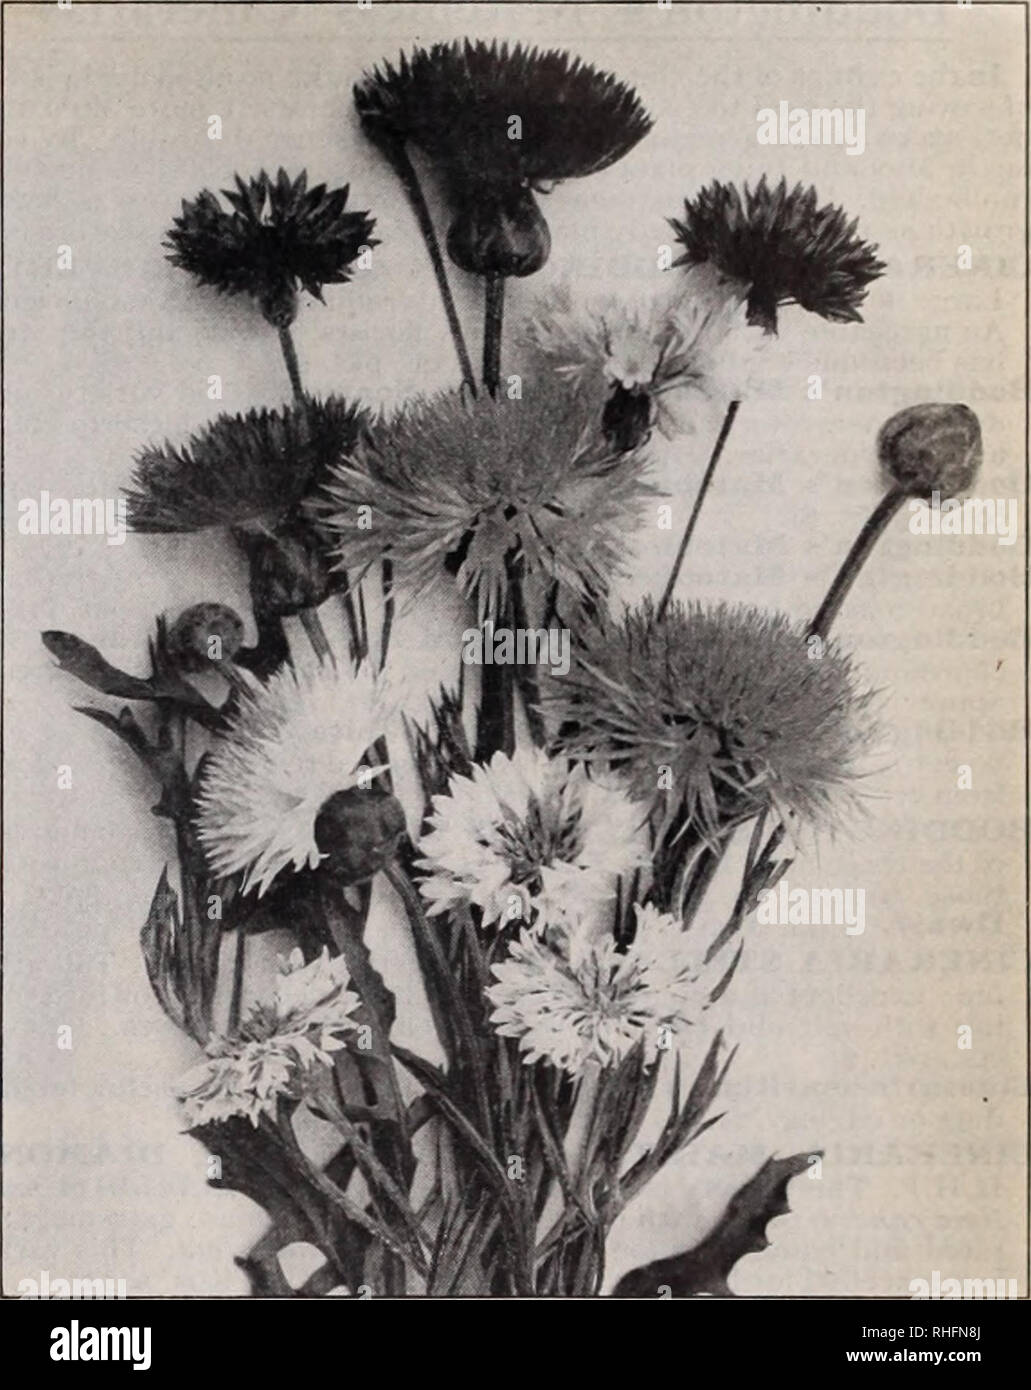 . Boddington's quality bulbs, seeds and plants / Arthur T. Boddington.. Nursery Catalogue. BODDINGTONS '^yUa£Wl/ SEEDS 21 Centaurea h.h.p. and h.a. Candidissima (Dusty Miller), i ft. For borders or Pkt. Oi. edgings Jioz., )iSi..$o 20 Gymnocarpa. Taller than the above 10 $0 80 Odorata, Chameleon. Yellow and rose; very fragrant. 10 200 Margaritae. ft. Flowers 2V2 inclies across, of the purest white and delightfully scented. A garden treasure. 10 i 00 Suaveolens (Yellow Sweet Sultan) 10 60 Montana, Blue. H.P. 2 ft. Summer 10 &quot; alba. H.P. 2 ft. White 10 CYANUS (Blue Cornflower, or Bachelor's  Stock Photo